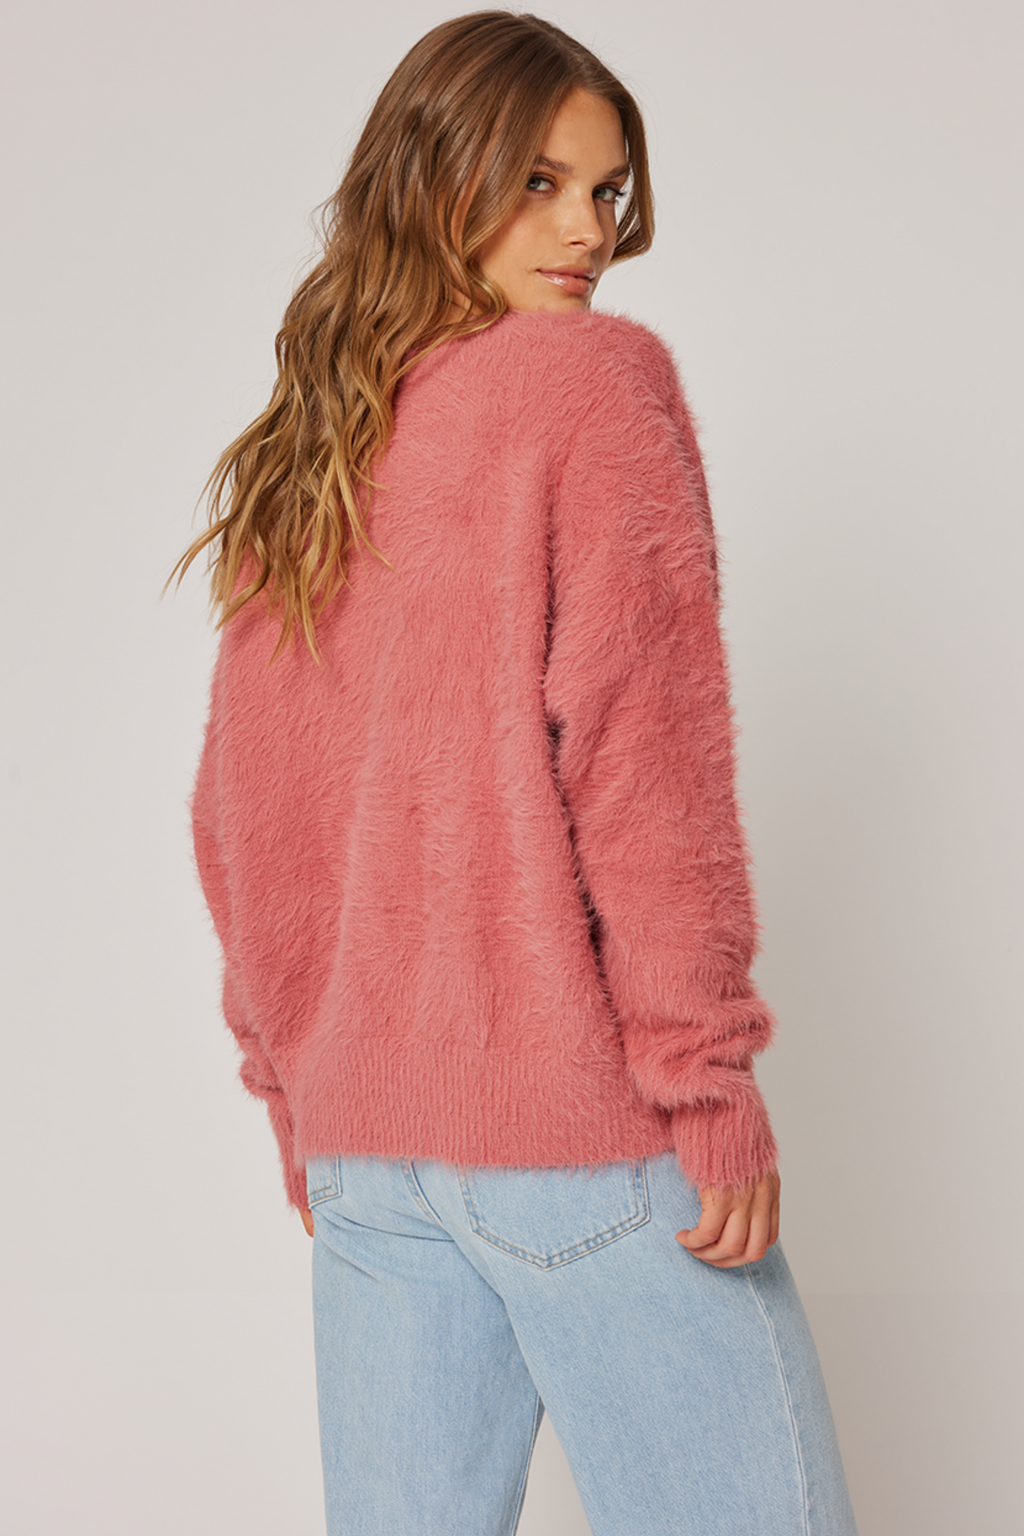 EMMIE SWEATER - Berry Knit